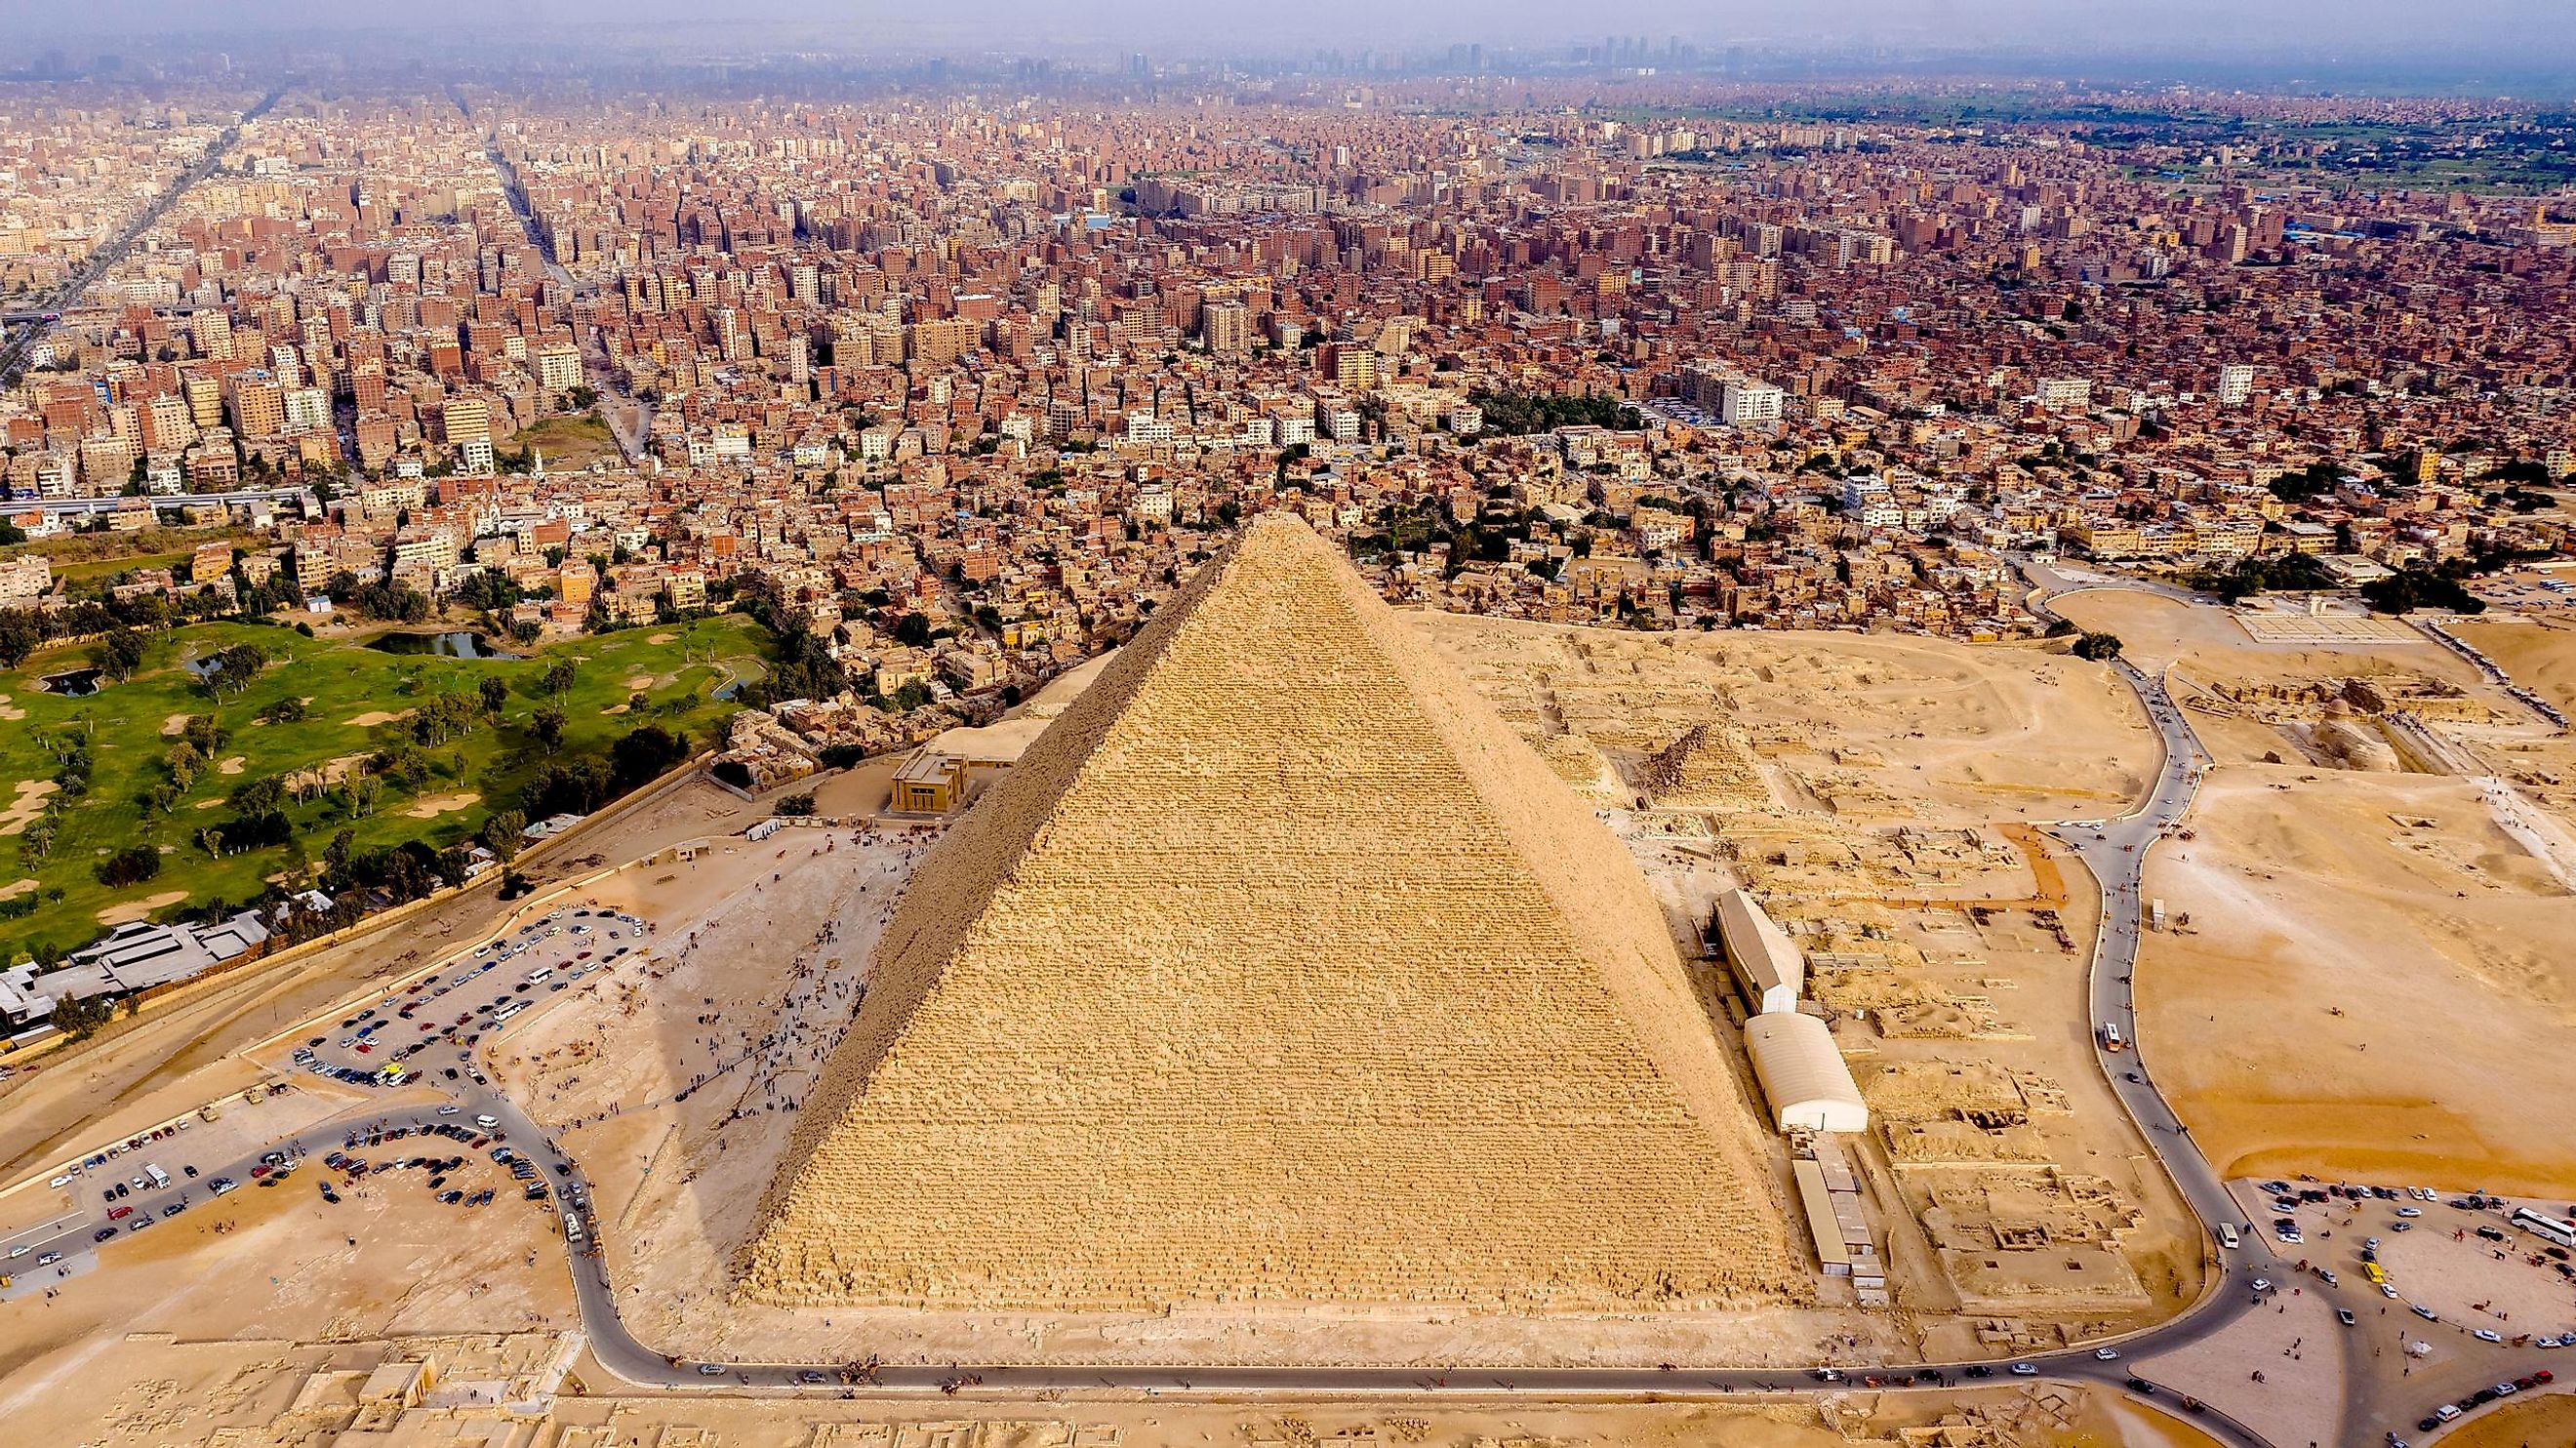 The Great Pyramid Of Giza in Egypt.